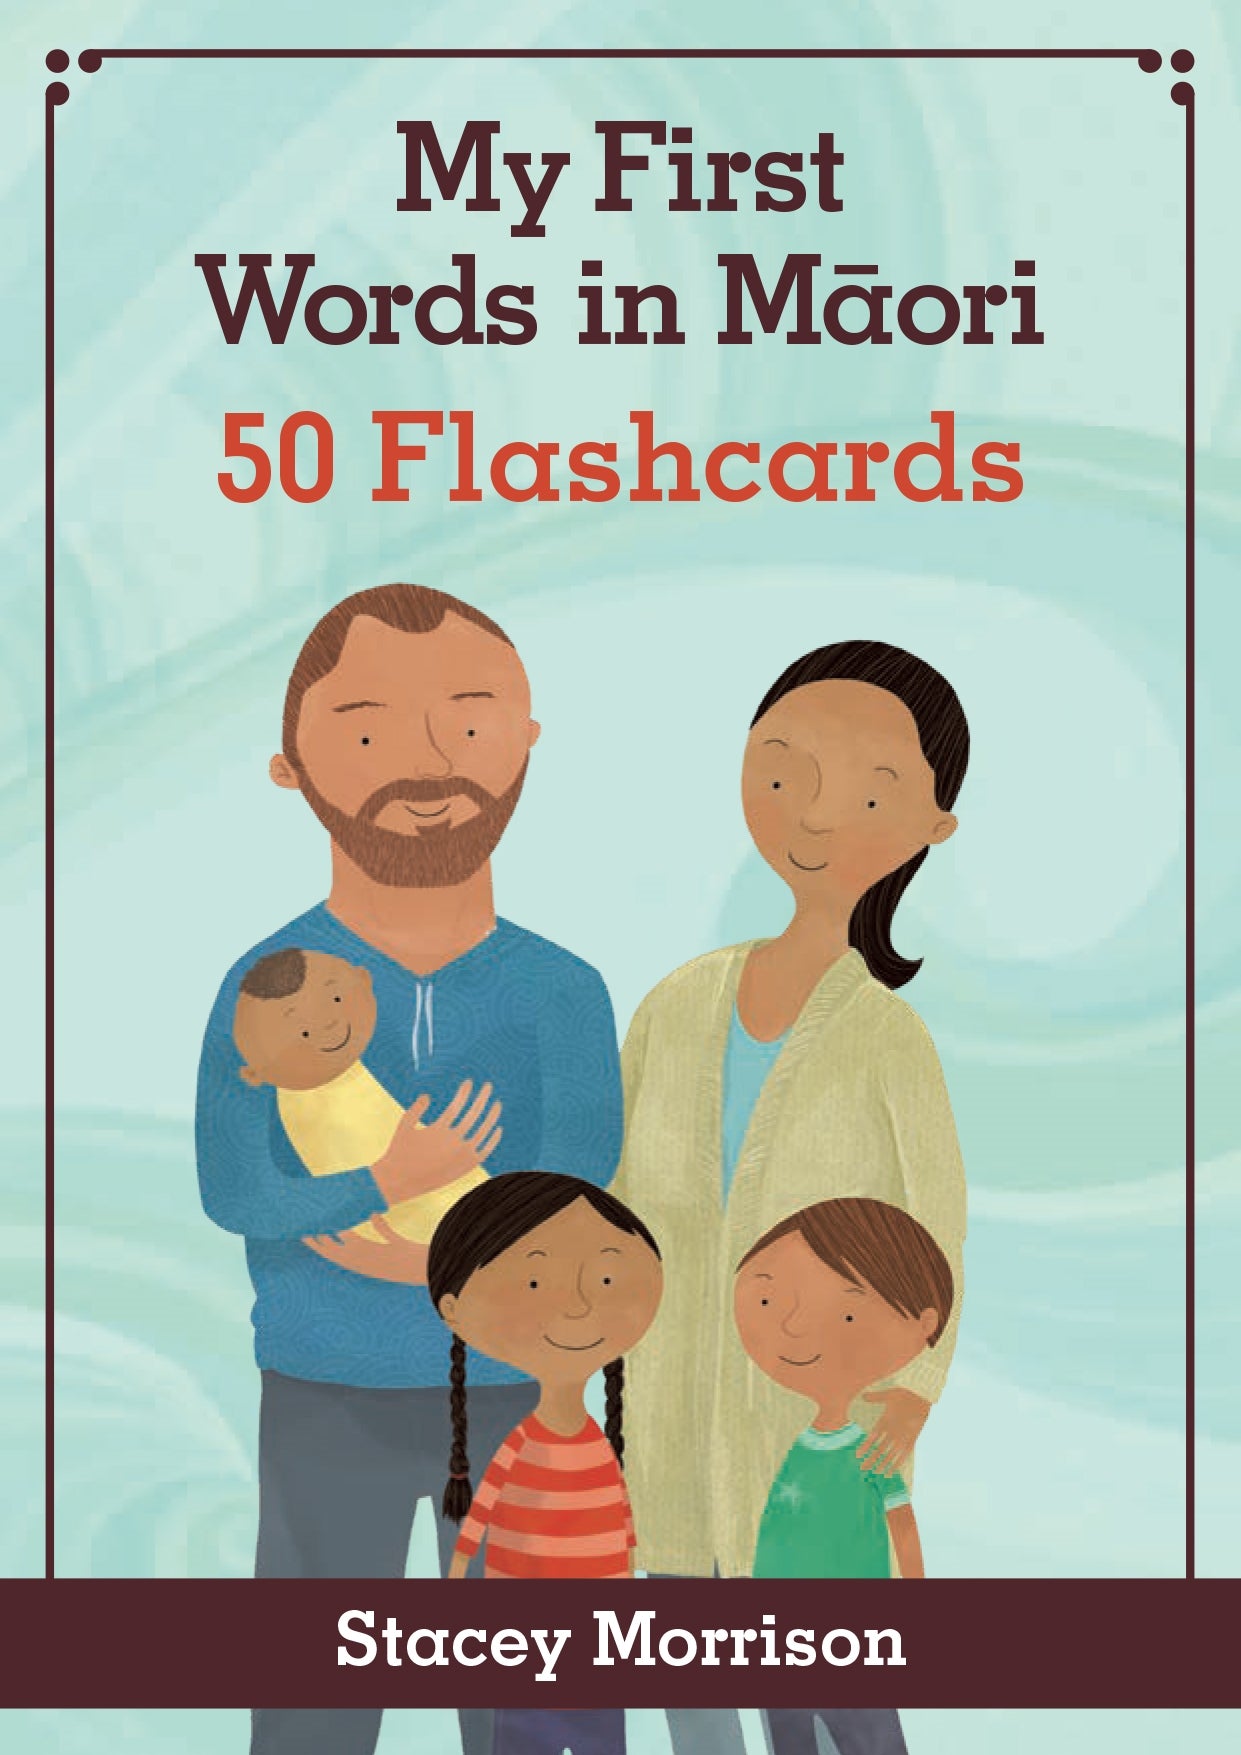 My First Words in Maori Flash Cards by Stacey Morrison